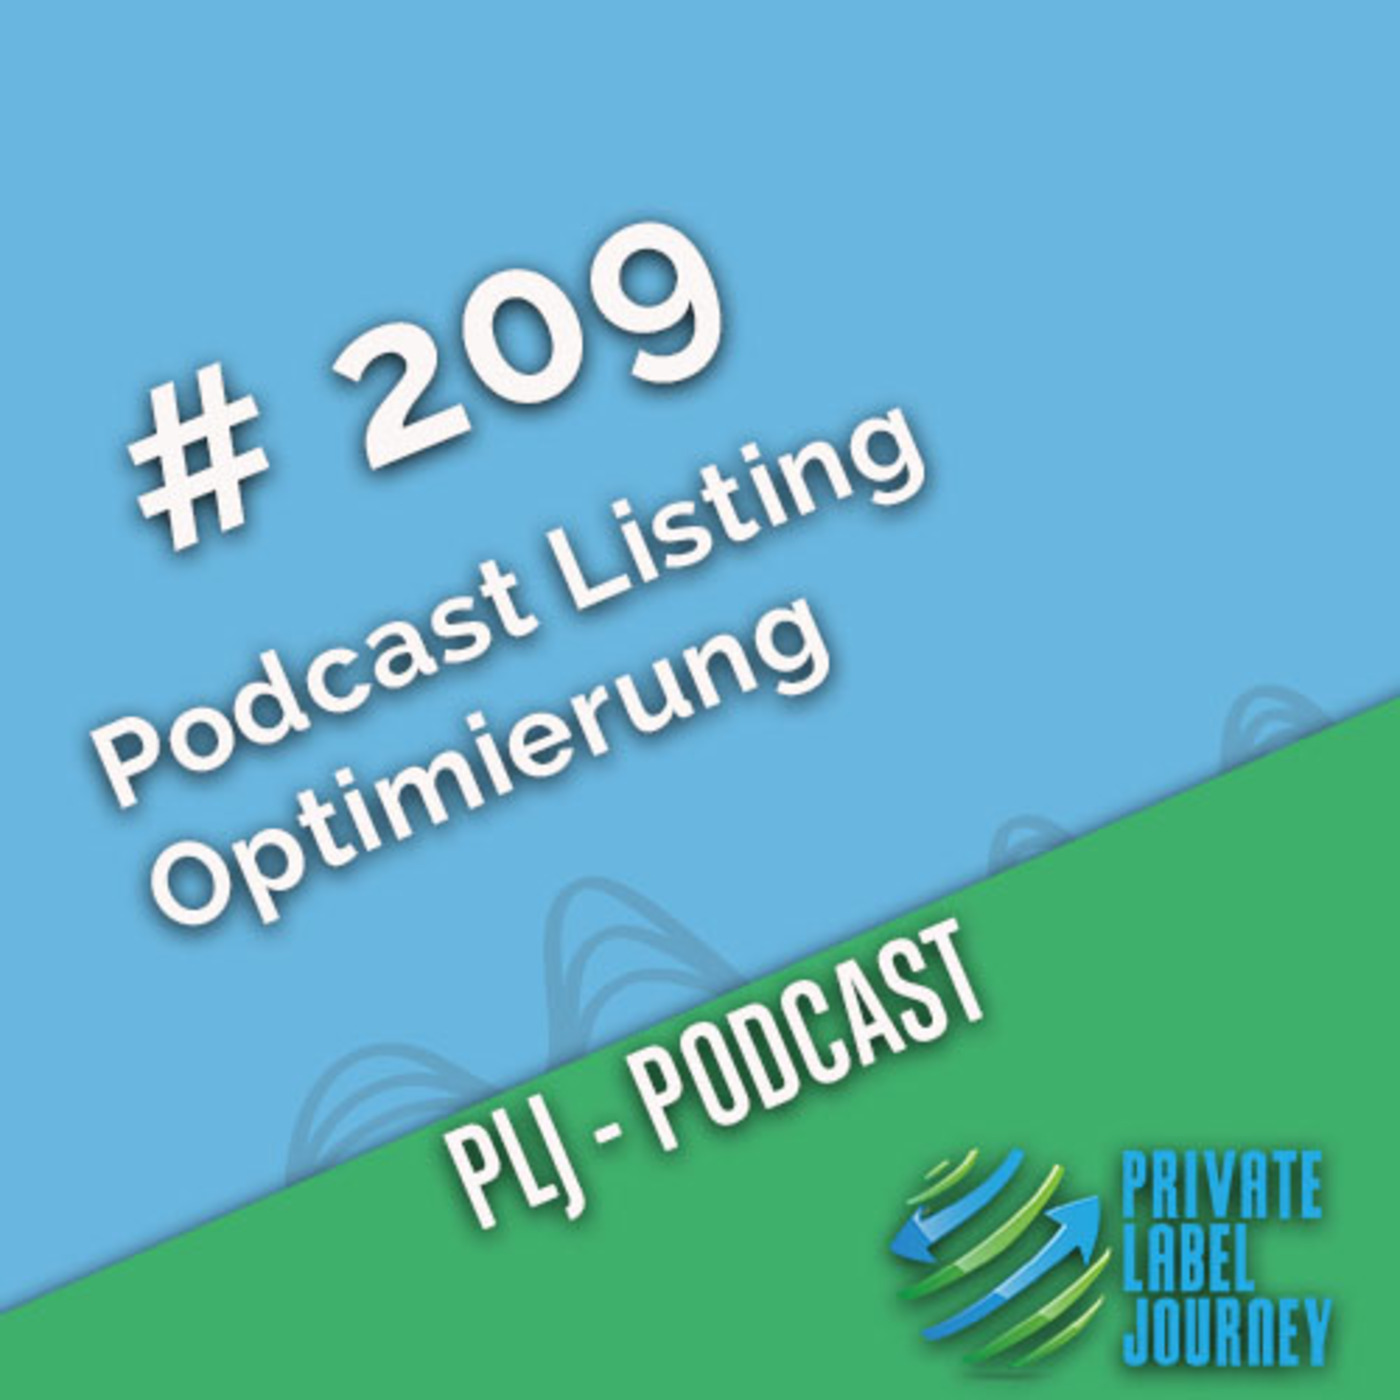 Podcast Listing Optimierung